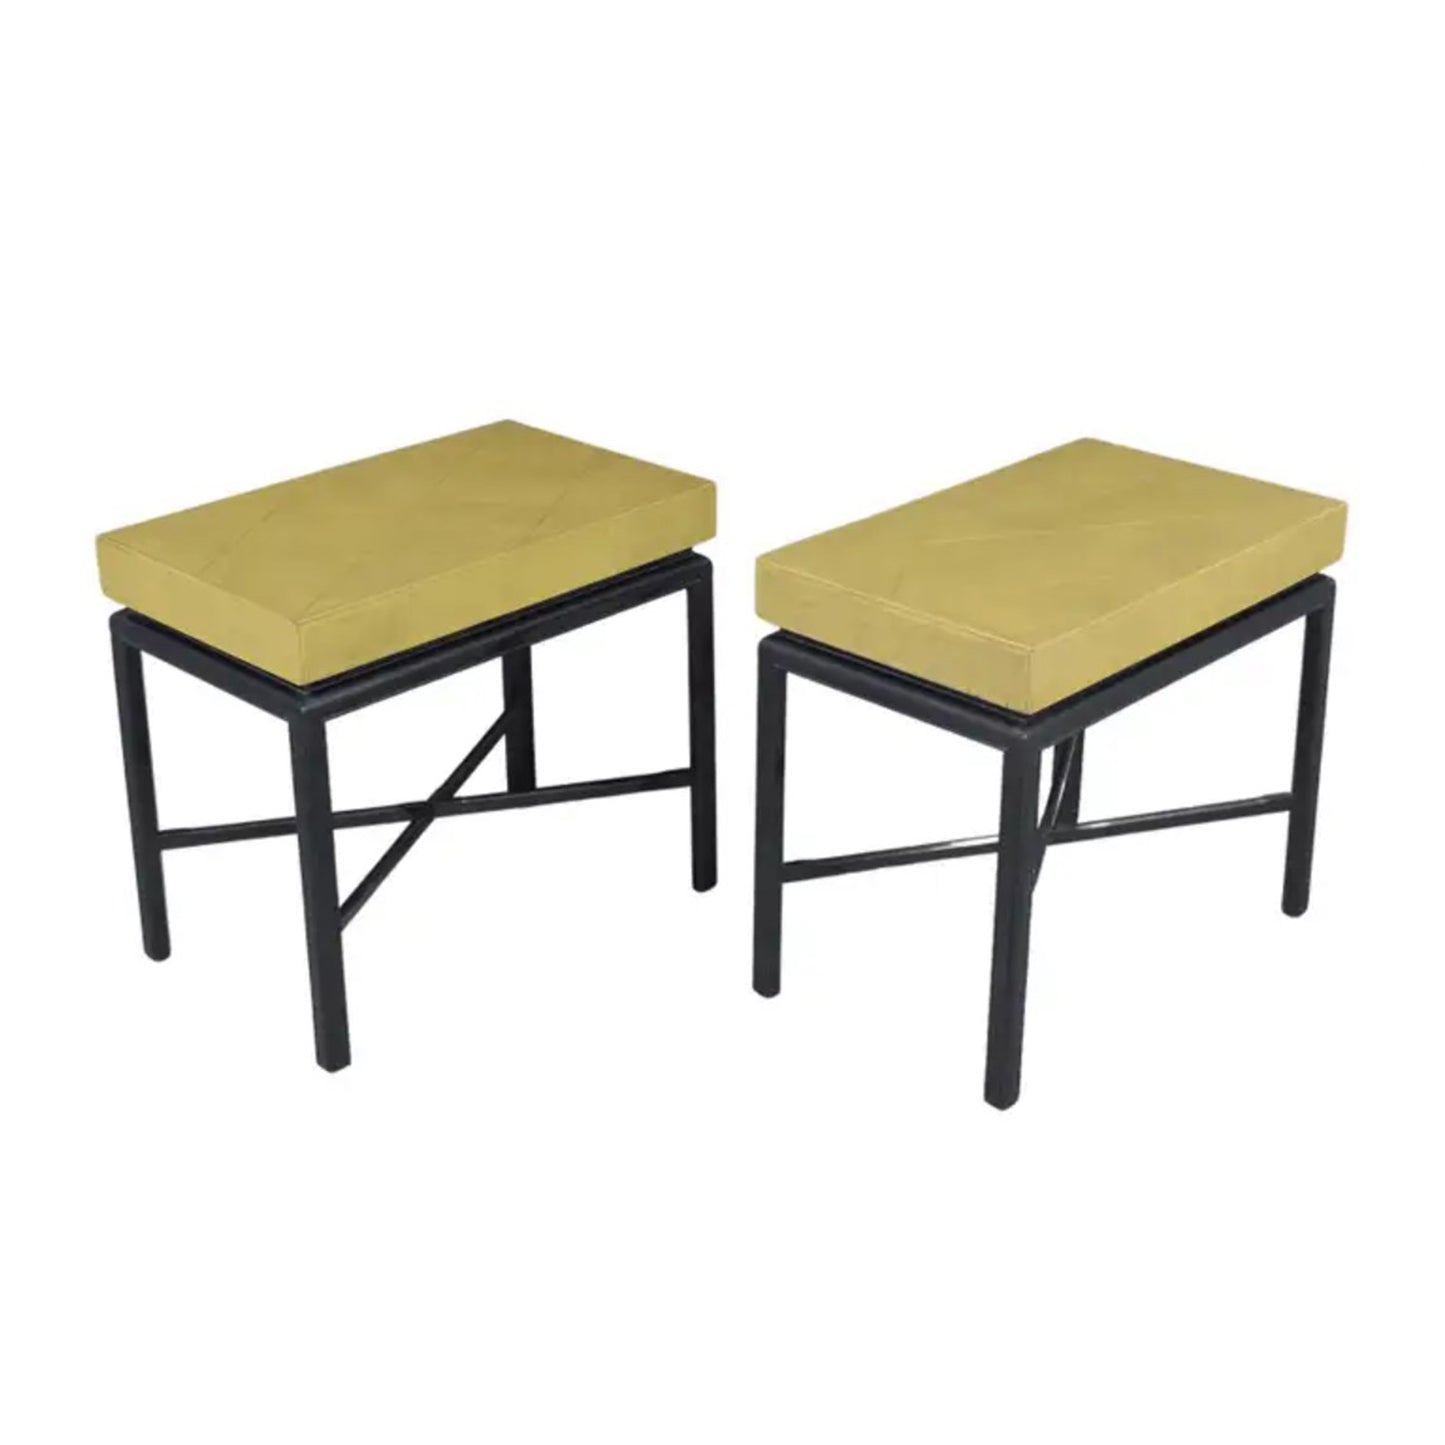 Pair of Restored Vintage Sheraton Style Side Tables with Green Leather Top